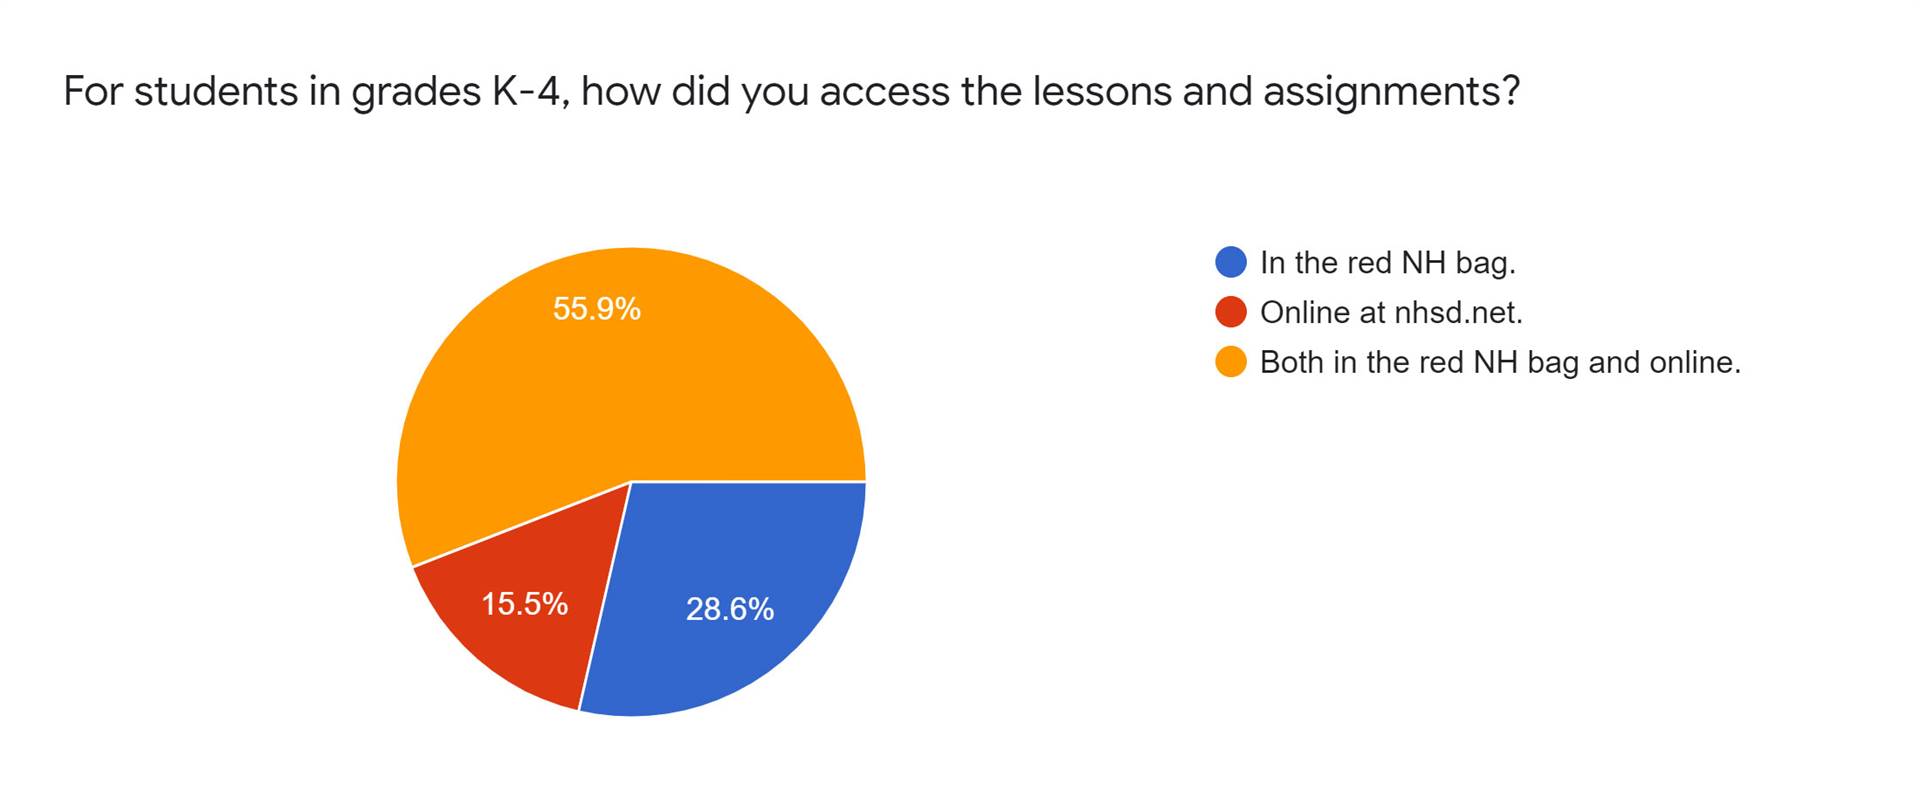 FID Survey Slide 8 - Pie chart showing how K-4 students accessed assignments